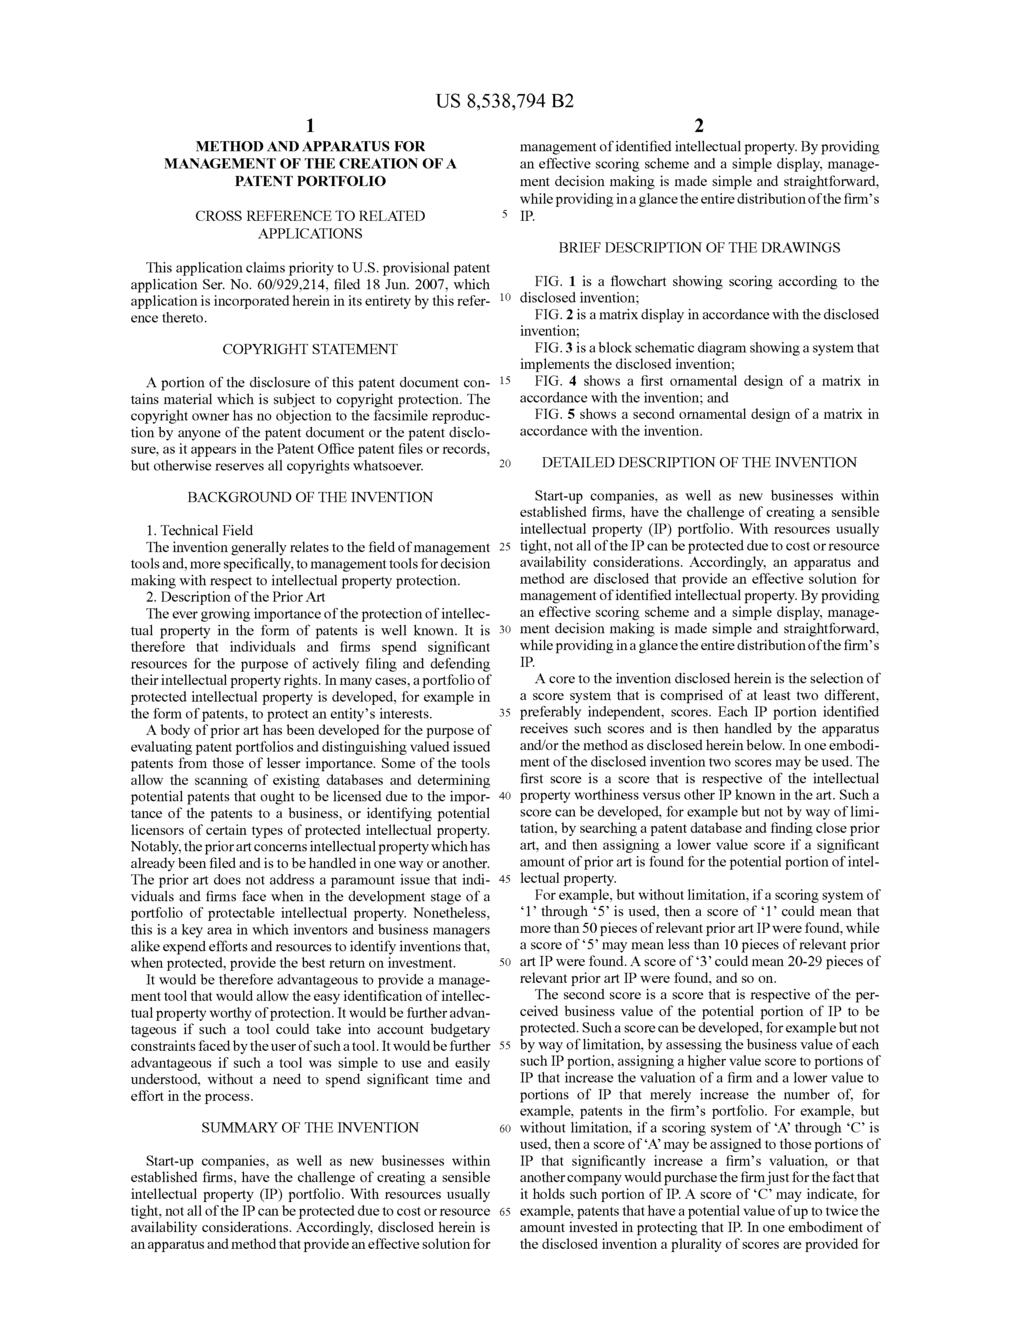 1. METHOD AND APPARATUS FOR MANAGEMENT OF THE CREATION OFA PATENT PORTFOLIO CROSS REFERENCE TO RELATED APPLICATIONS This application claims priority to U.S. provisional patent application Ser. No.